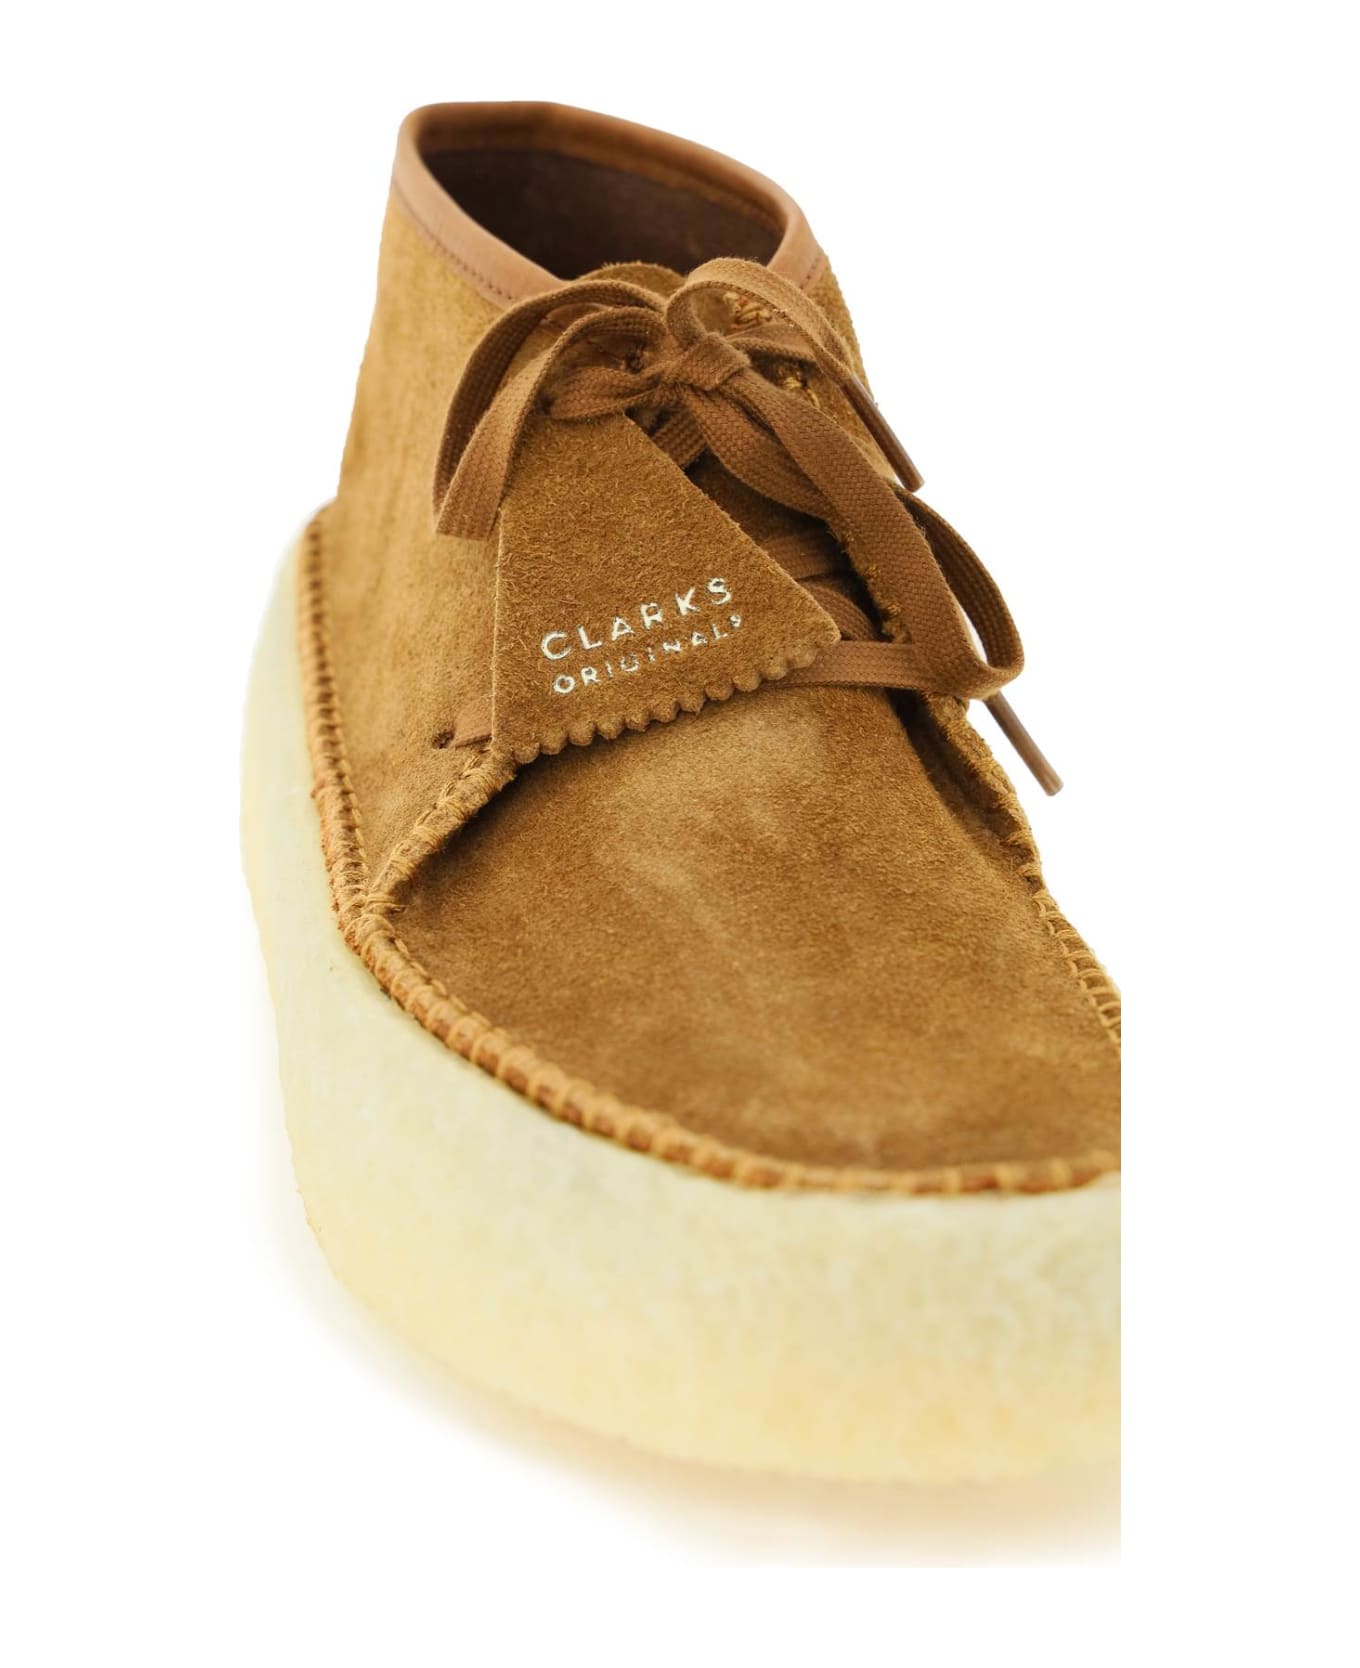 Clarks Suede Leather Caravan Lace-up Shoes - COLA (Brown) レースアップシューズ